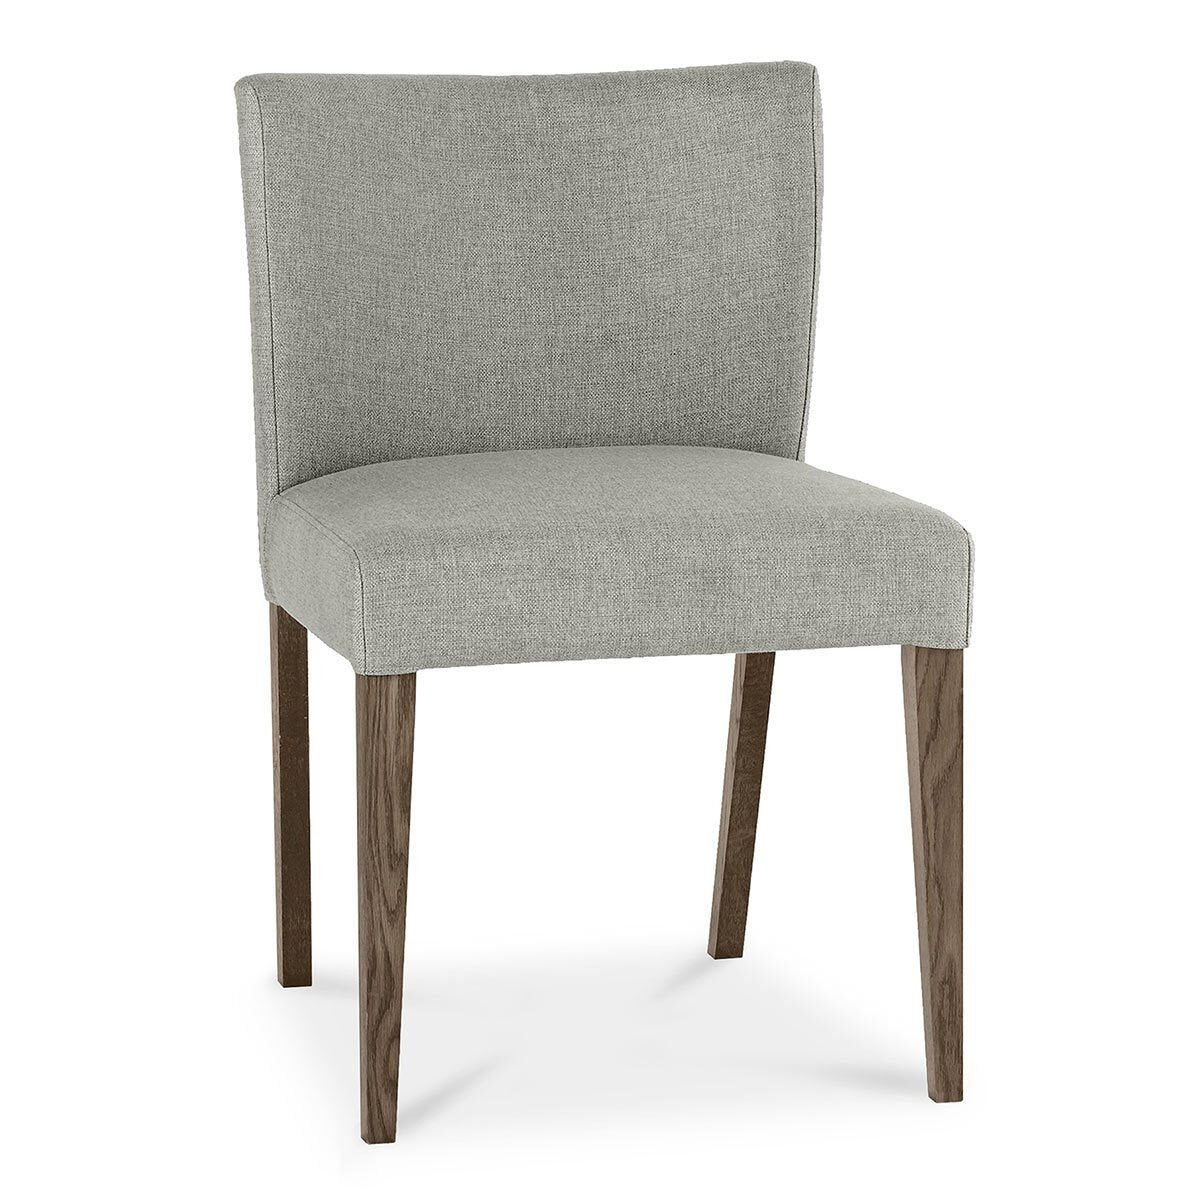 Bentley Designs Milan Low Back Grey Upholstered Dining Chairs, 2 Pack - Signature Retail Stores